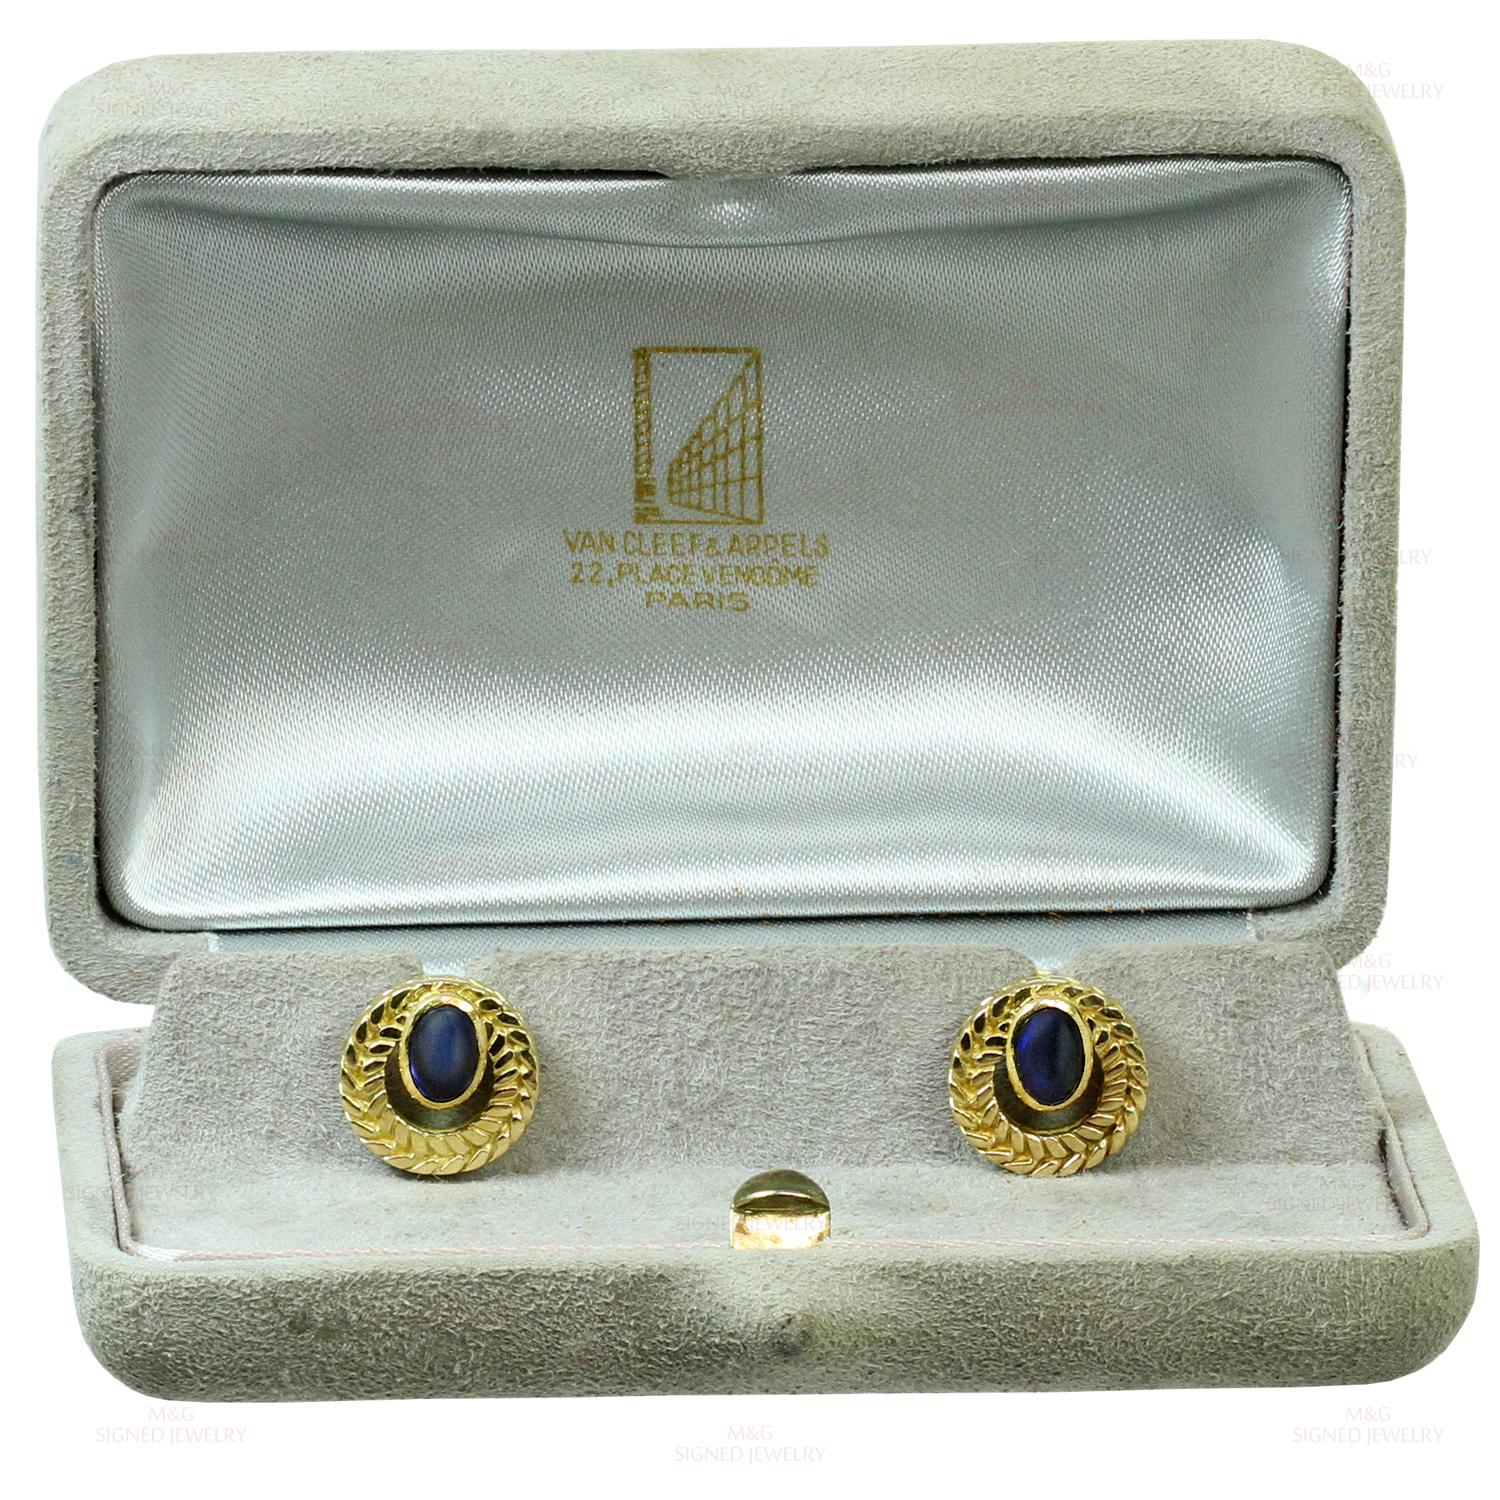 Men's Van Cleef & Arpels Cabochon Sapphire Gold Cufflinks Great Father's Day Gift